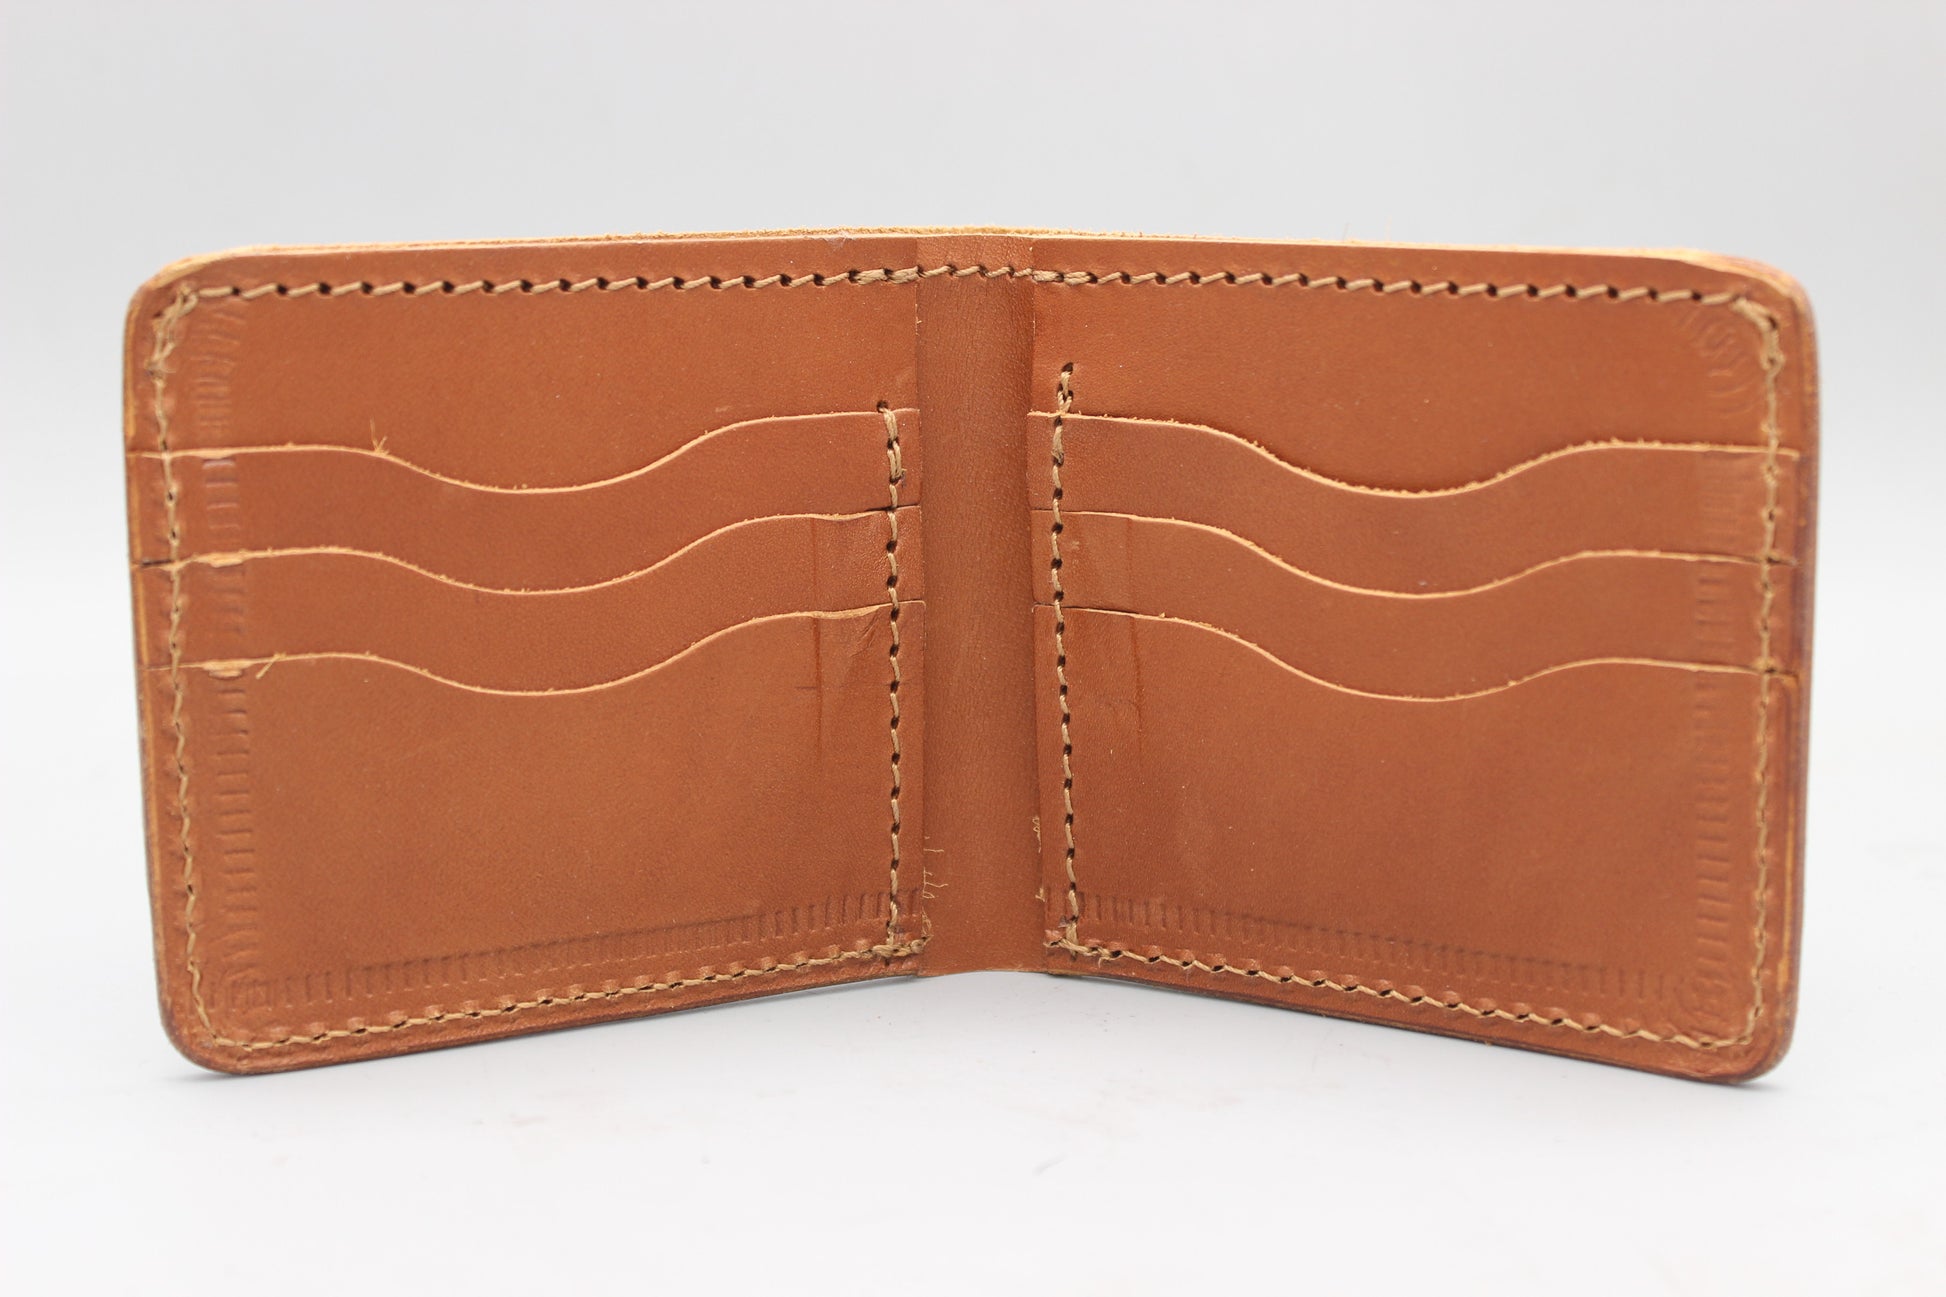 Brown Bi-fold wallet For Men. Six Card Slots and One Cash Compartment